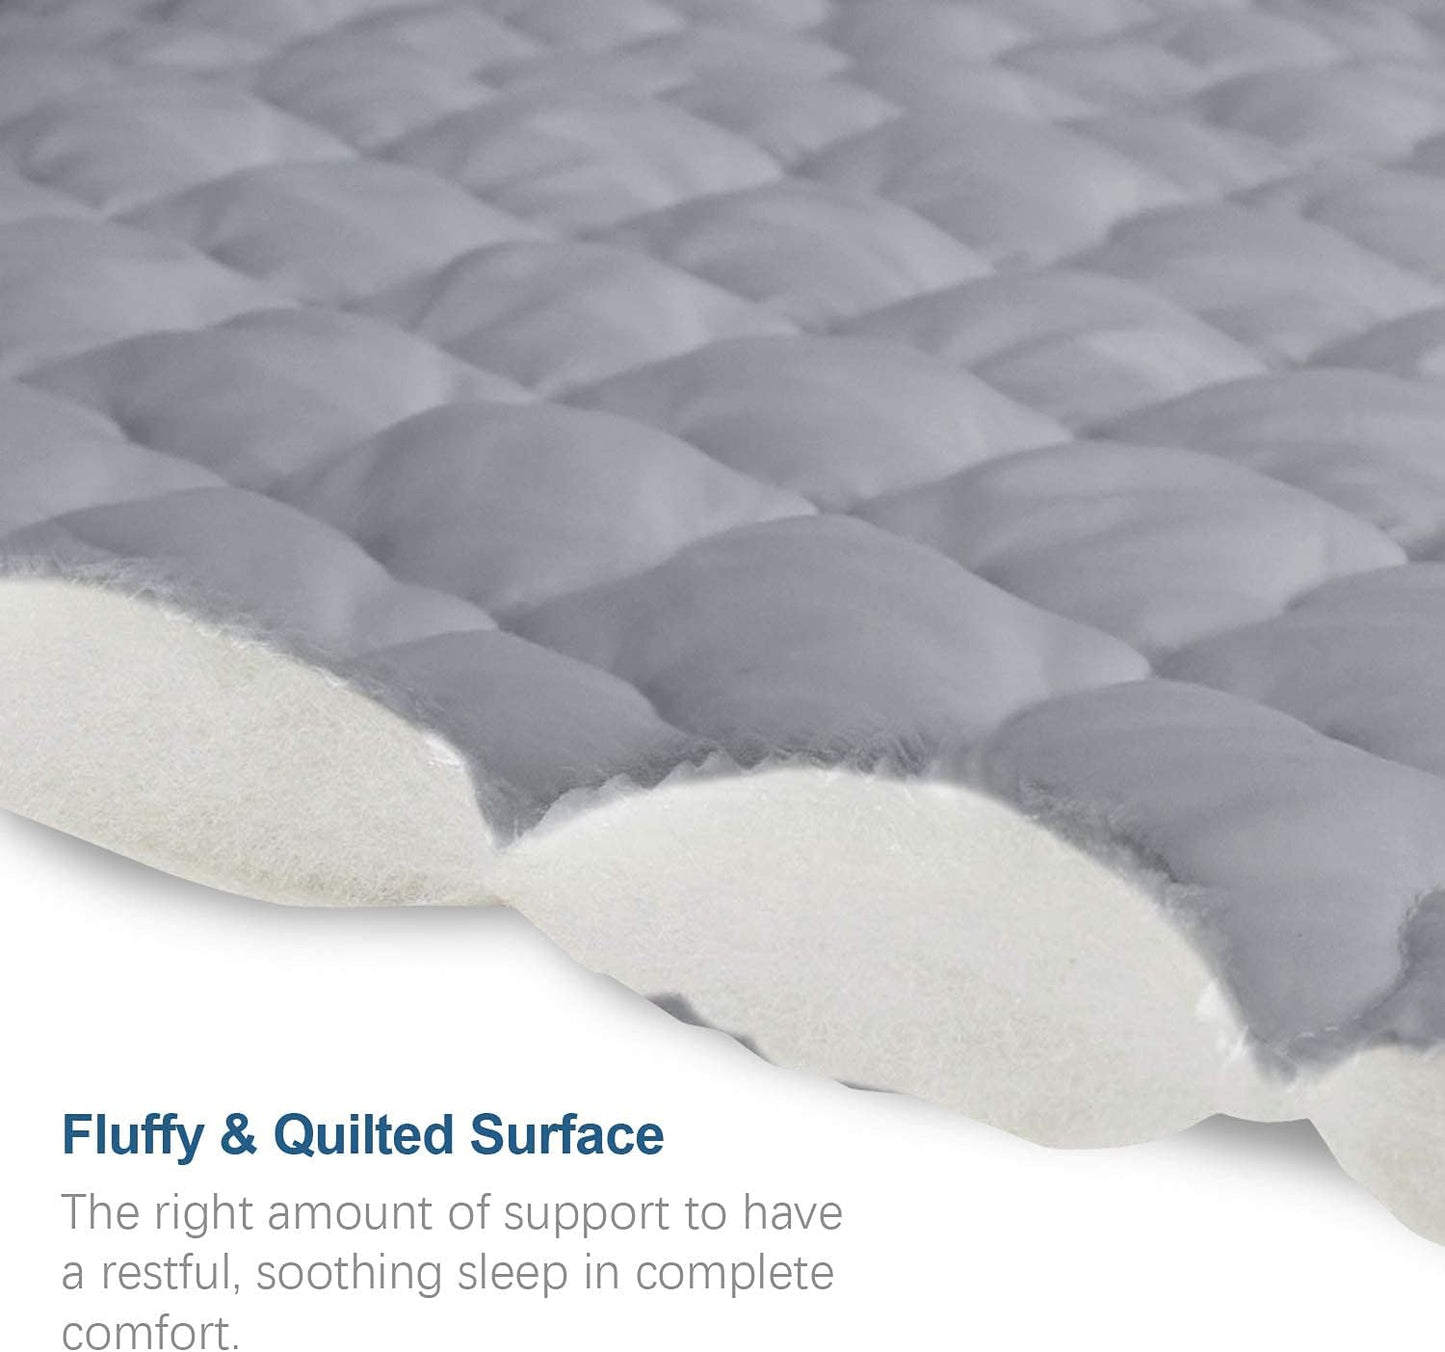 Waterproof Mattress Protector Quilted Twin & Full Size, Breathable & Noiseless Mattress Pad Cover, Fitted with Deep Pocket, Grey